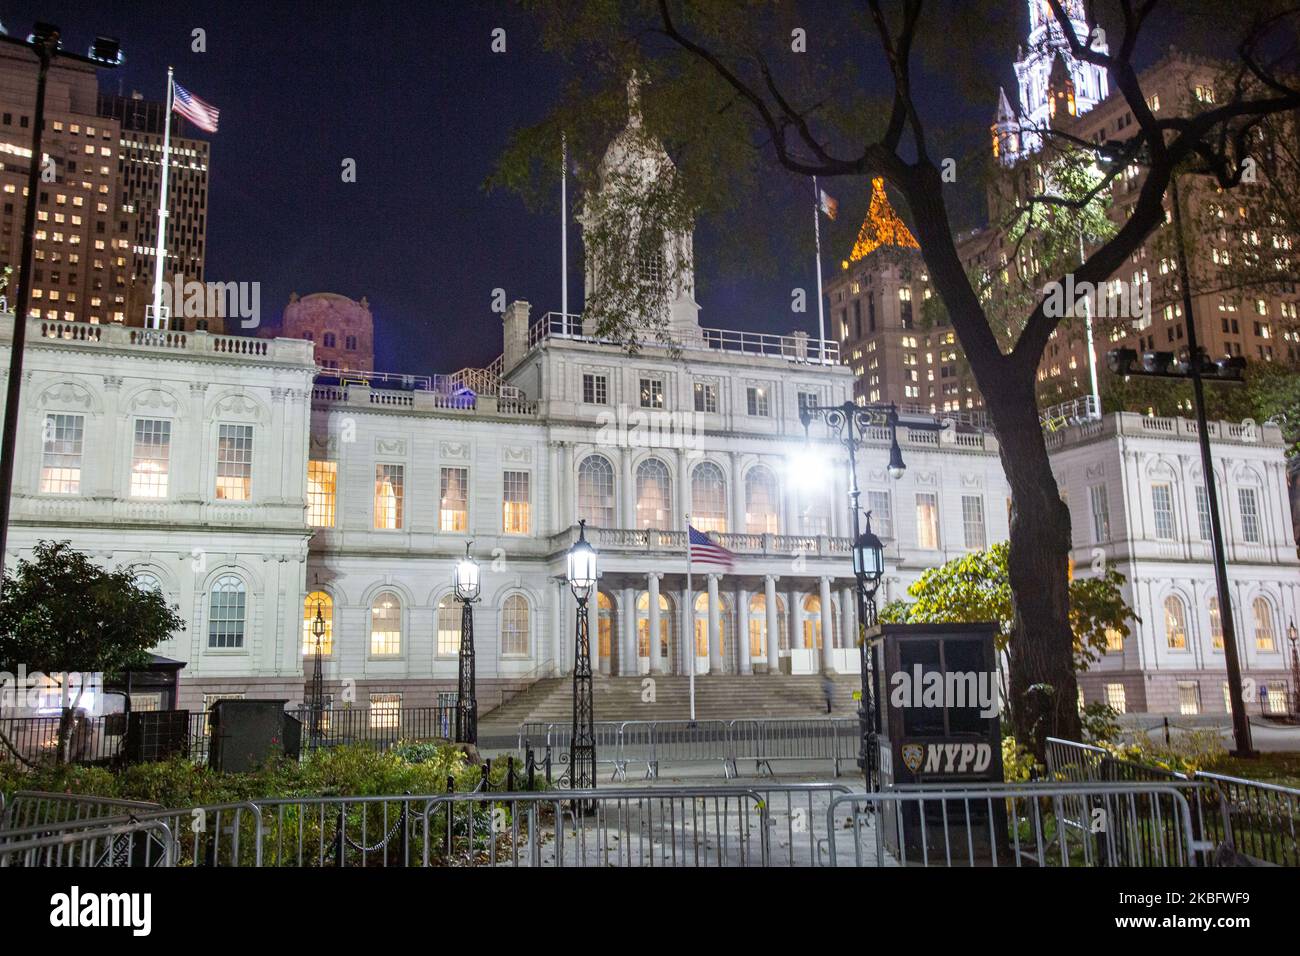 New York City Hall circa 1812 government complex, the seat of NYC government and office of the mayor, city council, located at the center of City Hall Park in the Civic Center area of Lower Manhattan, between Broadway, Park Row, and Chambers Street as seen illuminated at night. The historic building with exterior French Renaissance Revival architectural style is the oldest city hall in the United States that still houses its original governmental functions. NY, USA (Photo by Nicolas Economou/NurPhoto) Stock Photo